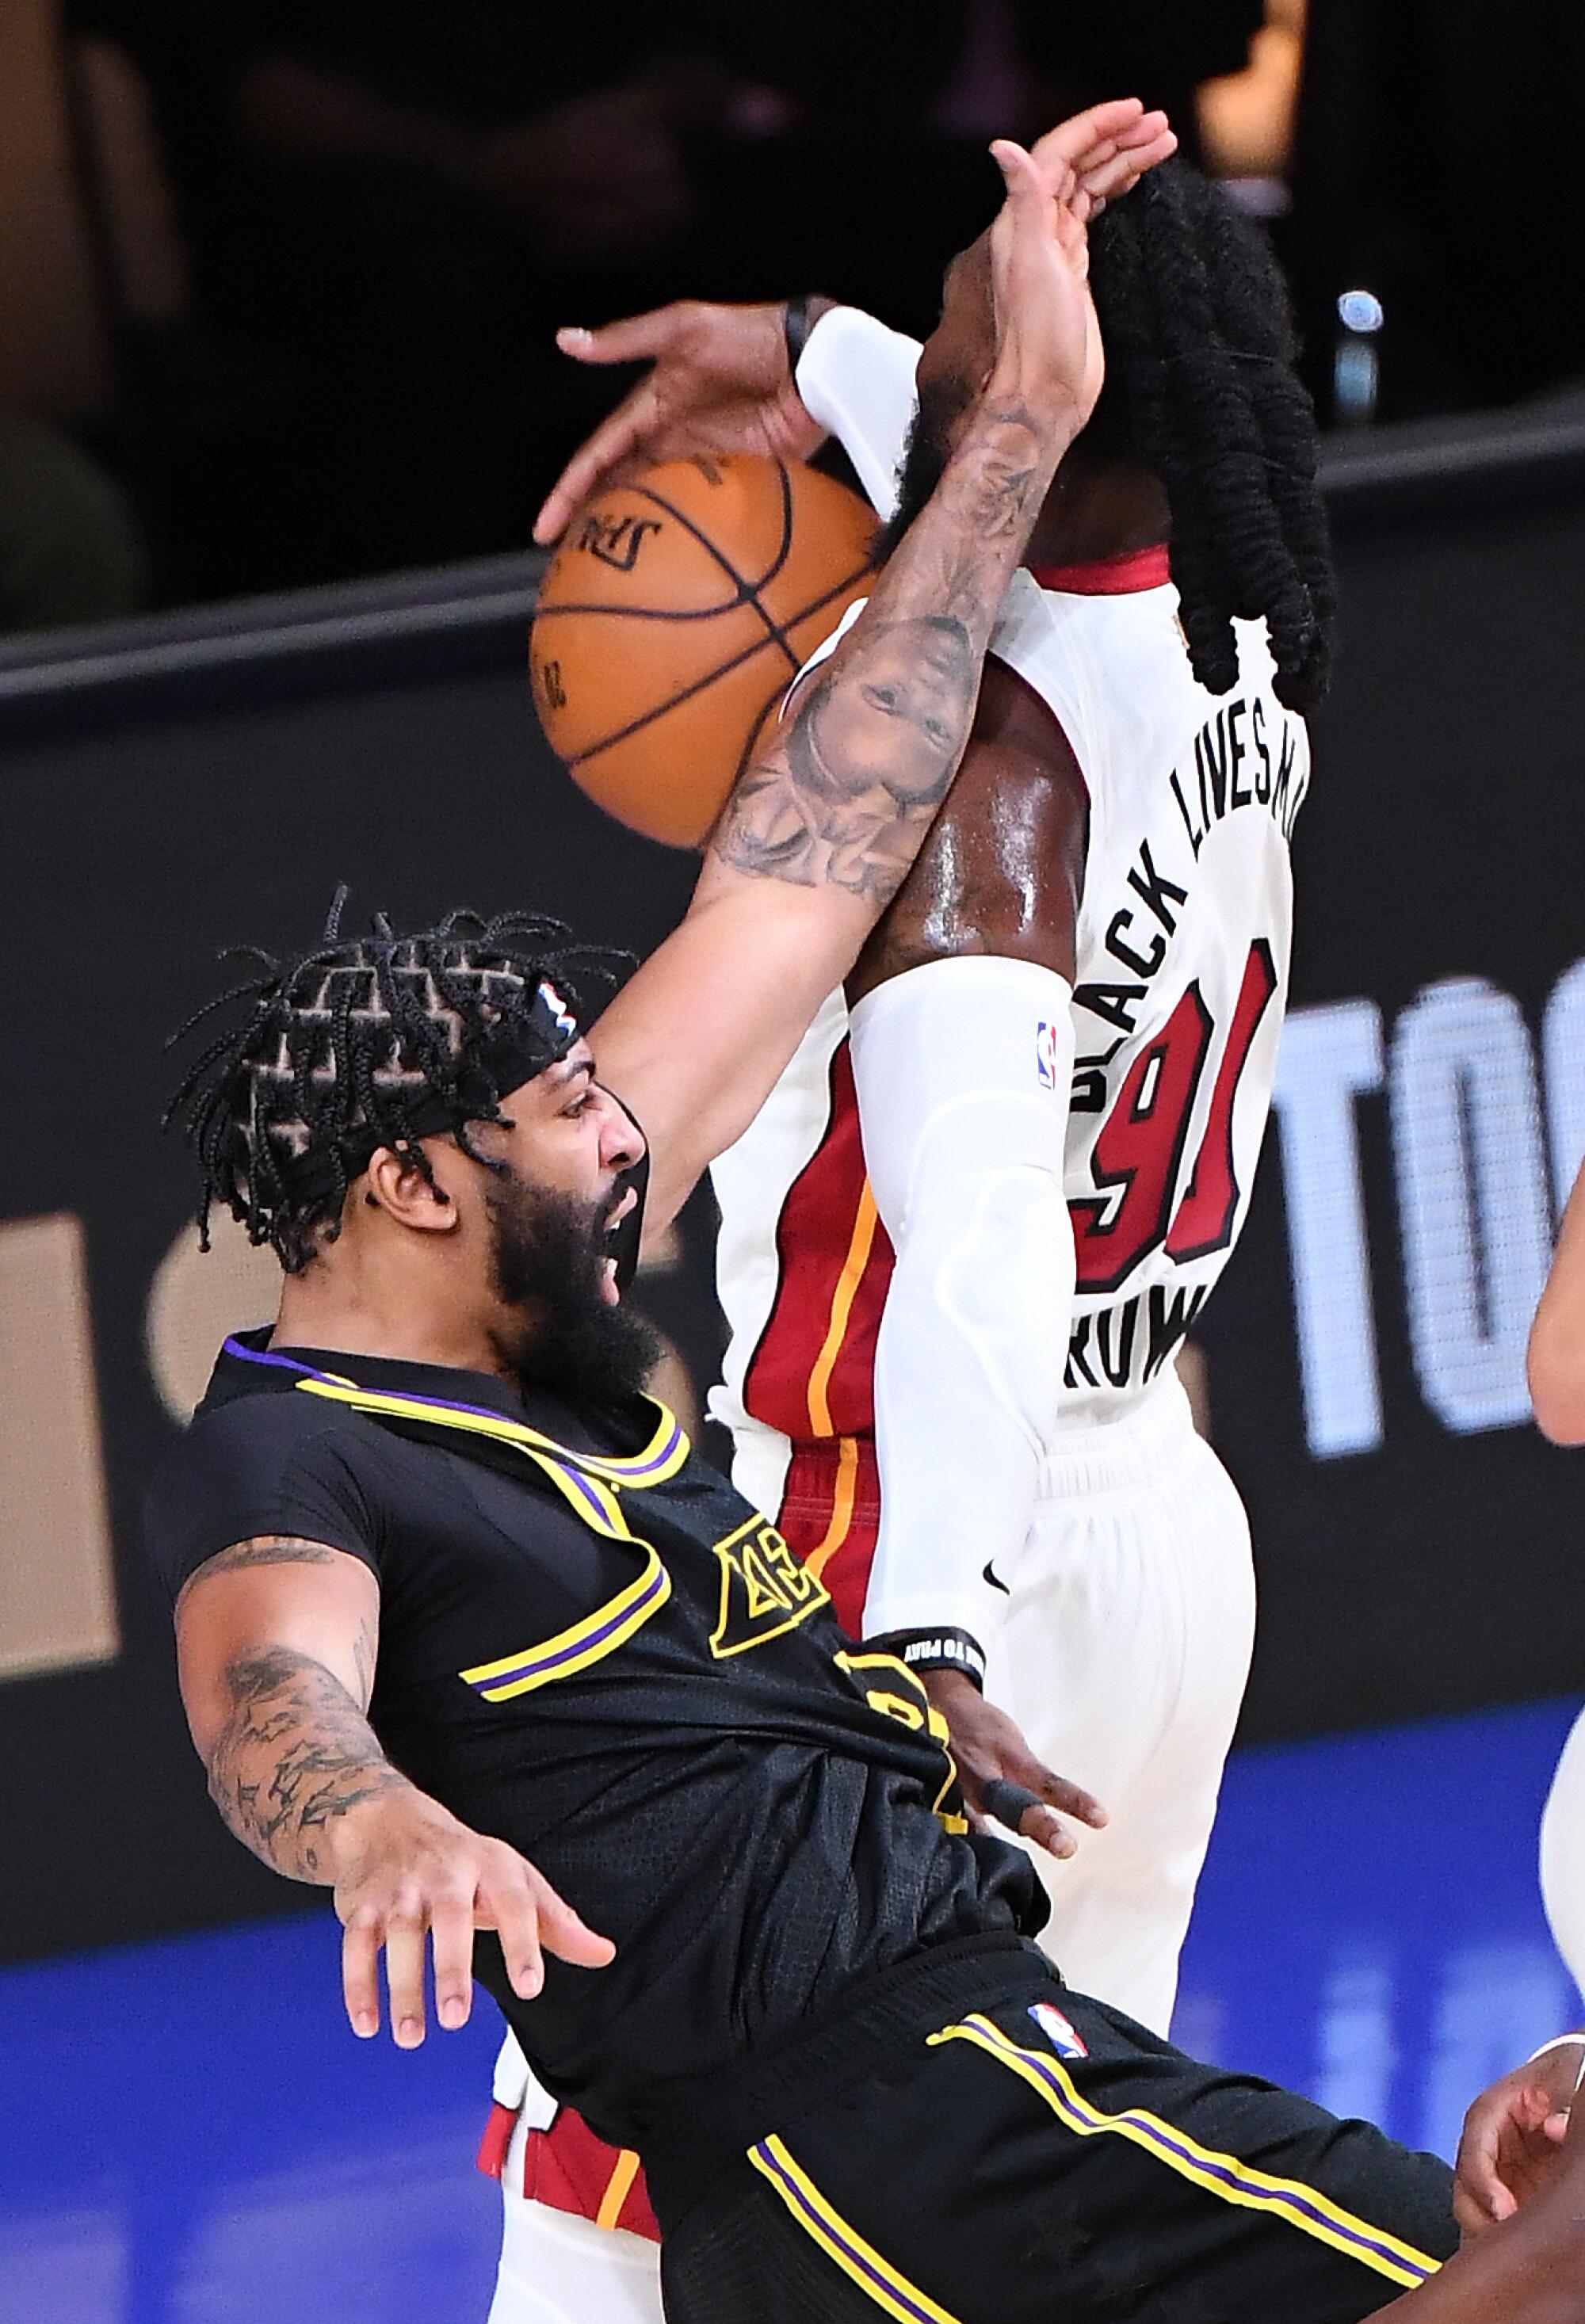 Lakers forward Anthony Davis and Miami's Jae Crowder collide during the second quarter of Game 2 of the NBA Finals.